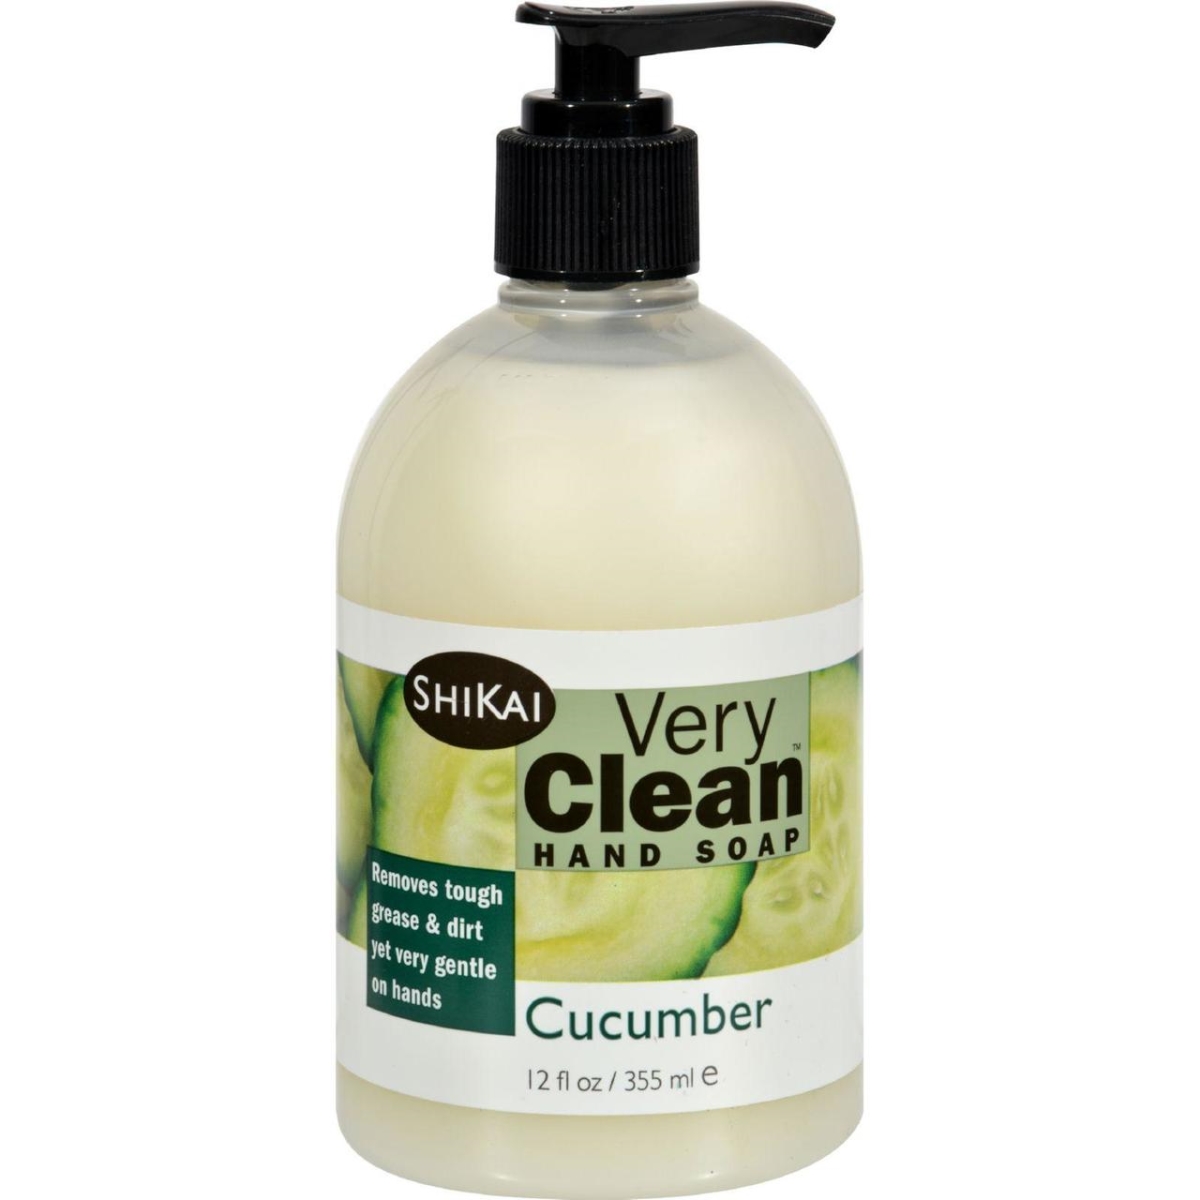 Hg1384106 12 Oz Hand Soap - Very Clean Cucumber